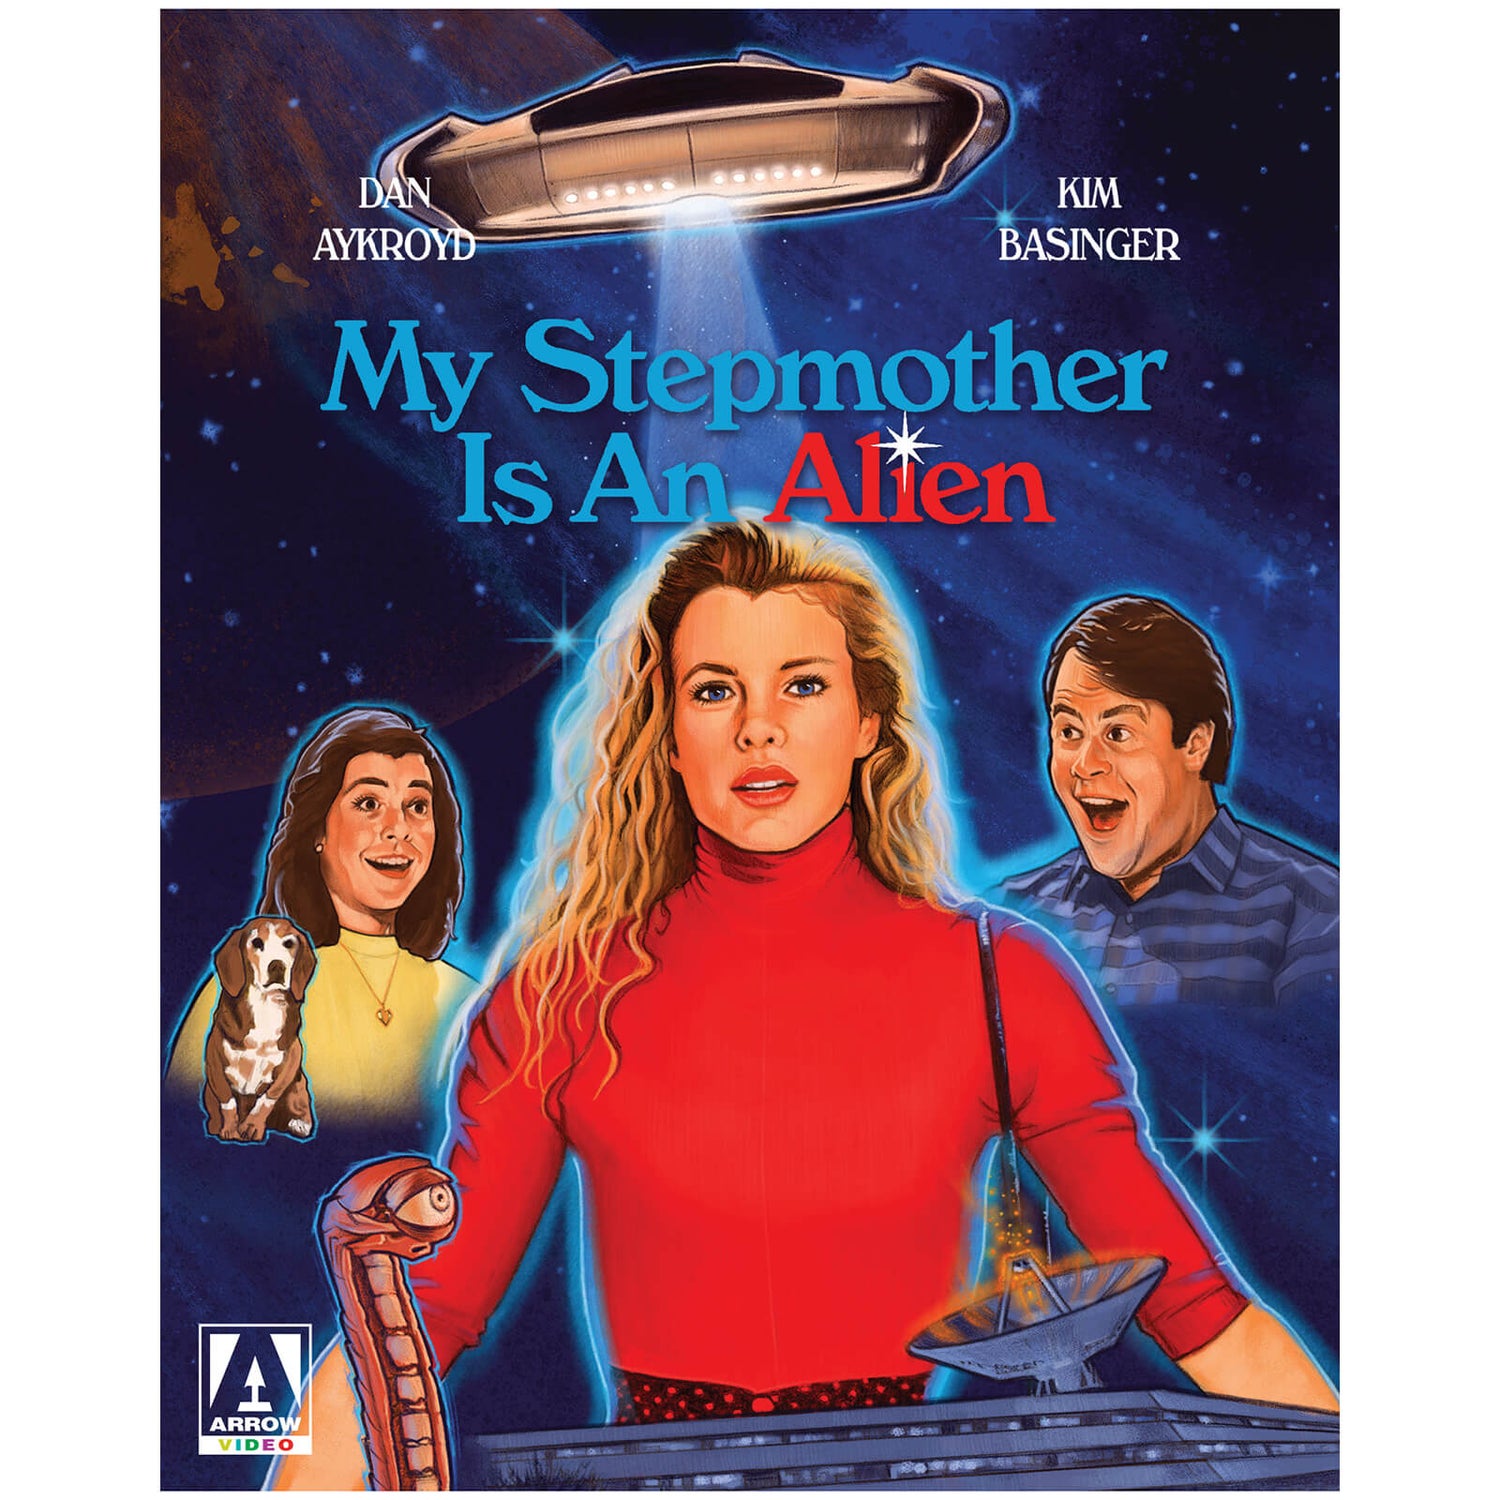 My Stepmother Is An Alien Blu-ray